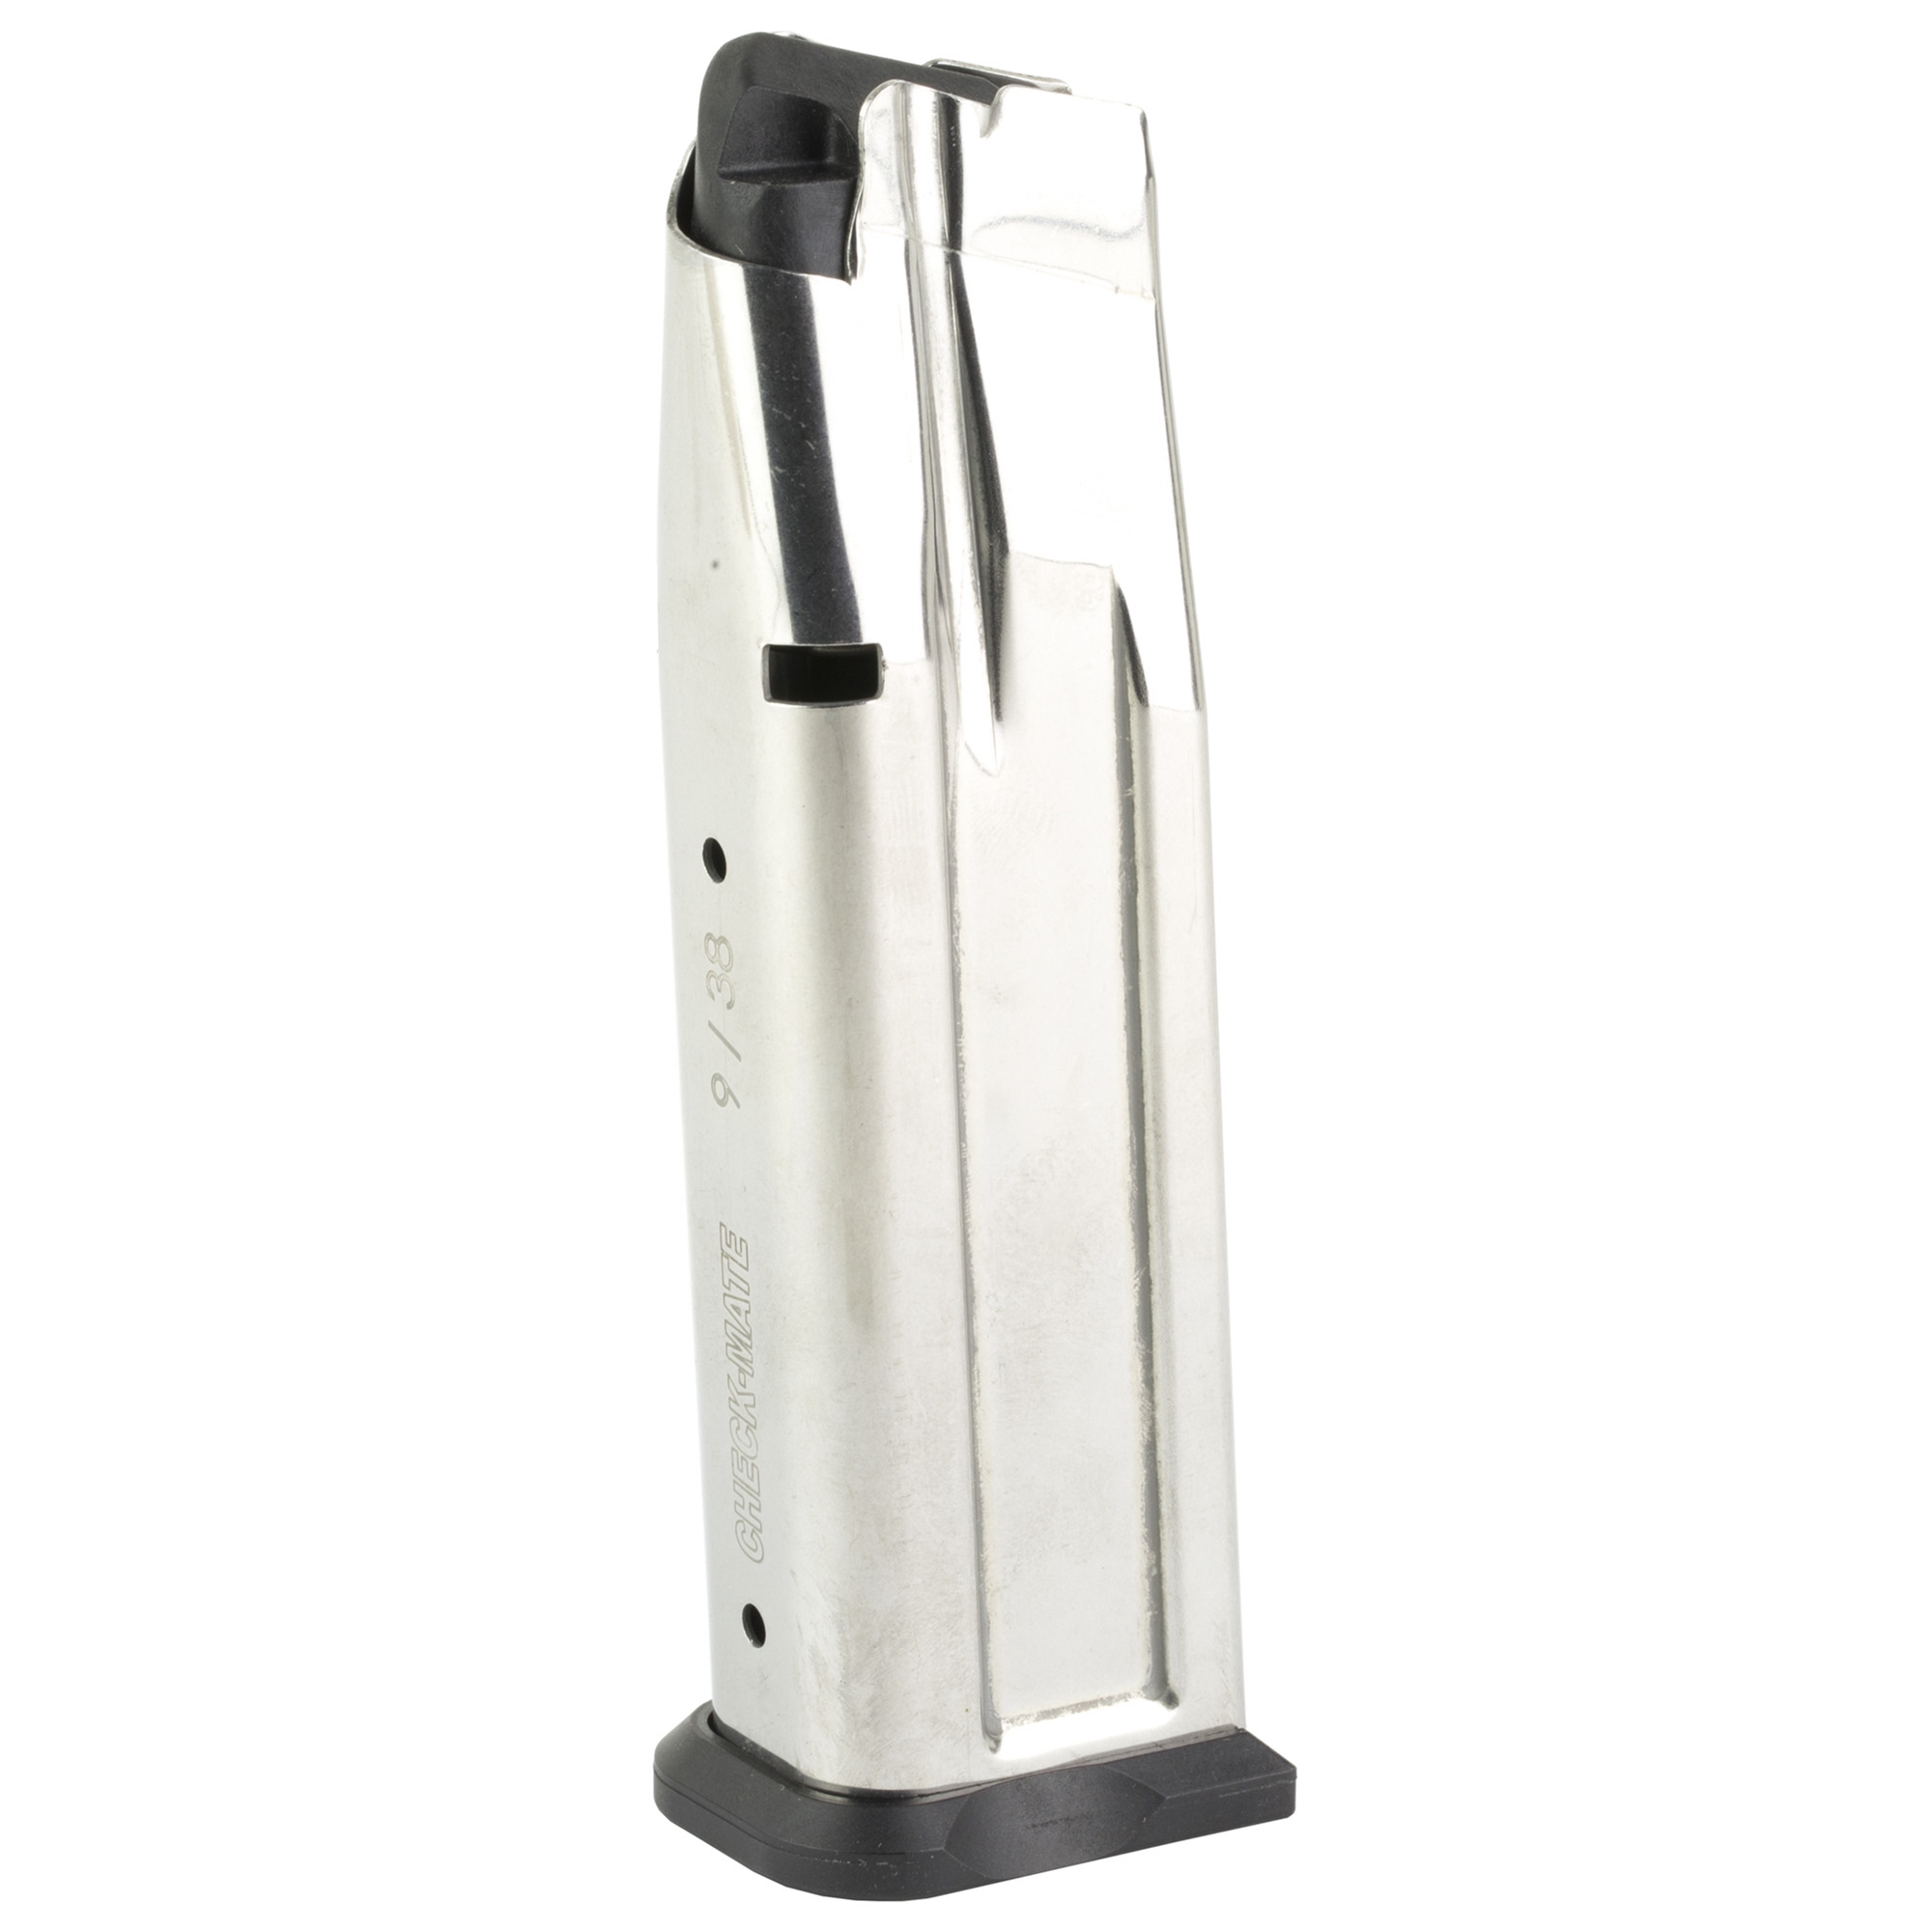 EAA 9mm Magazine 17 RDS for  2011 / 2311